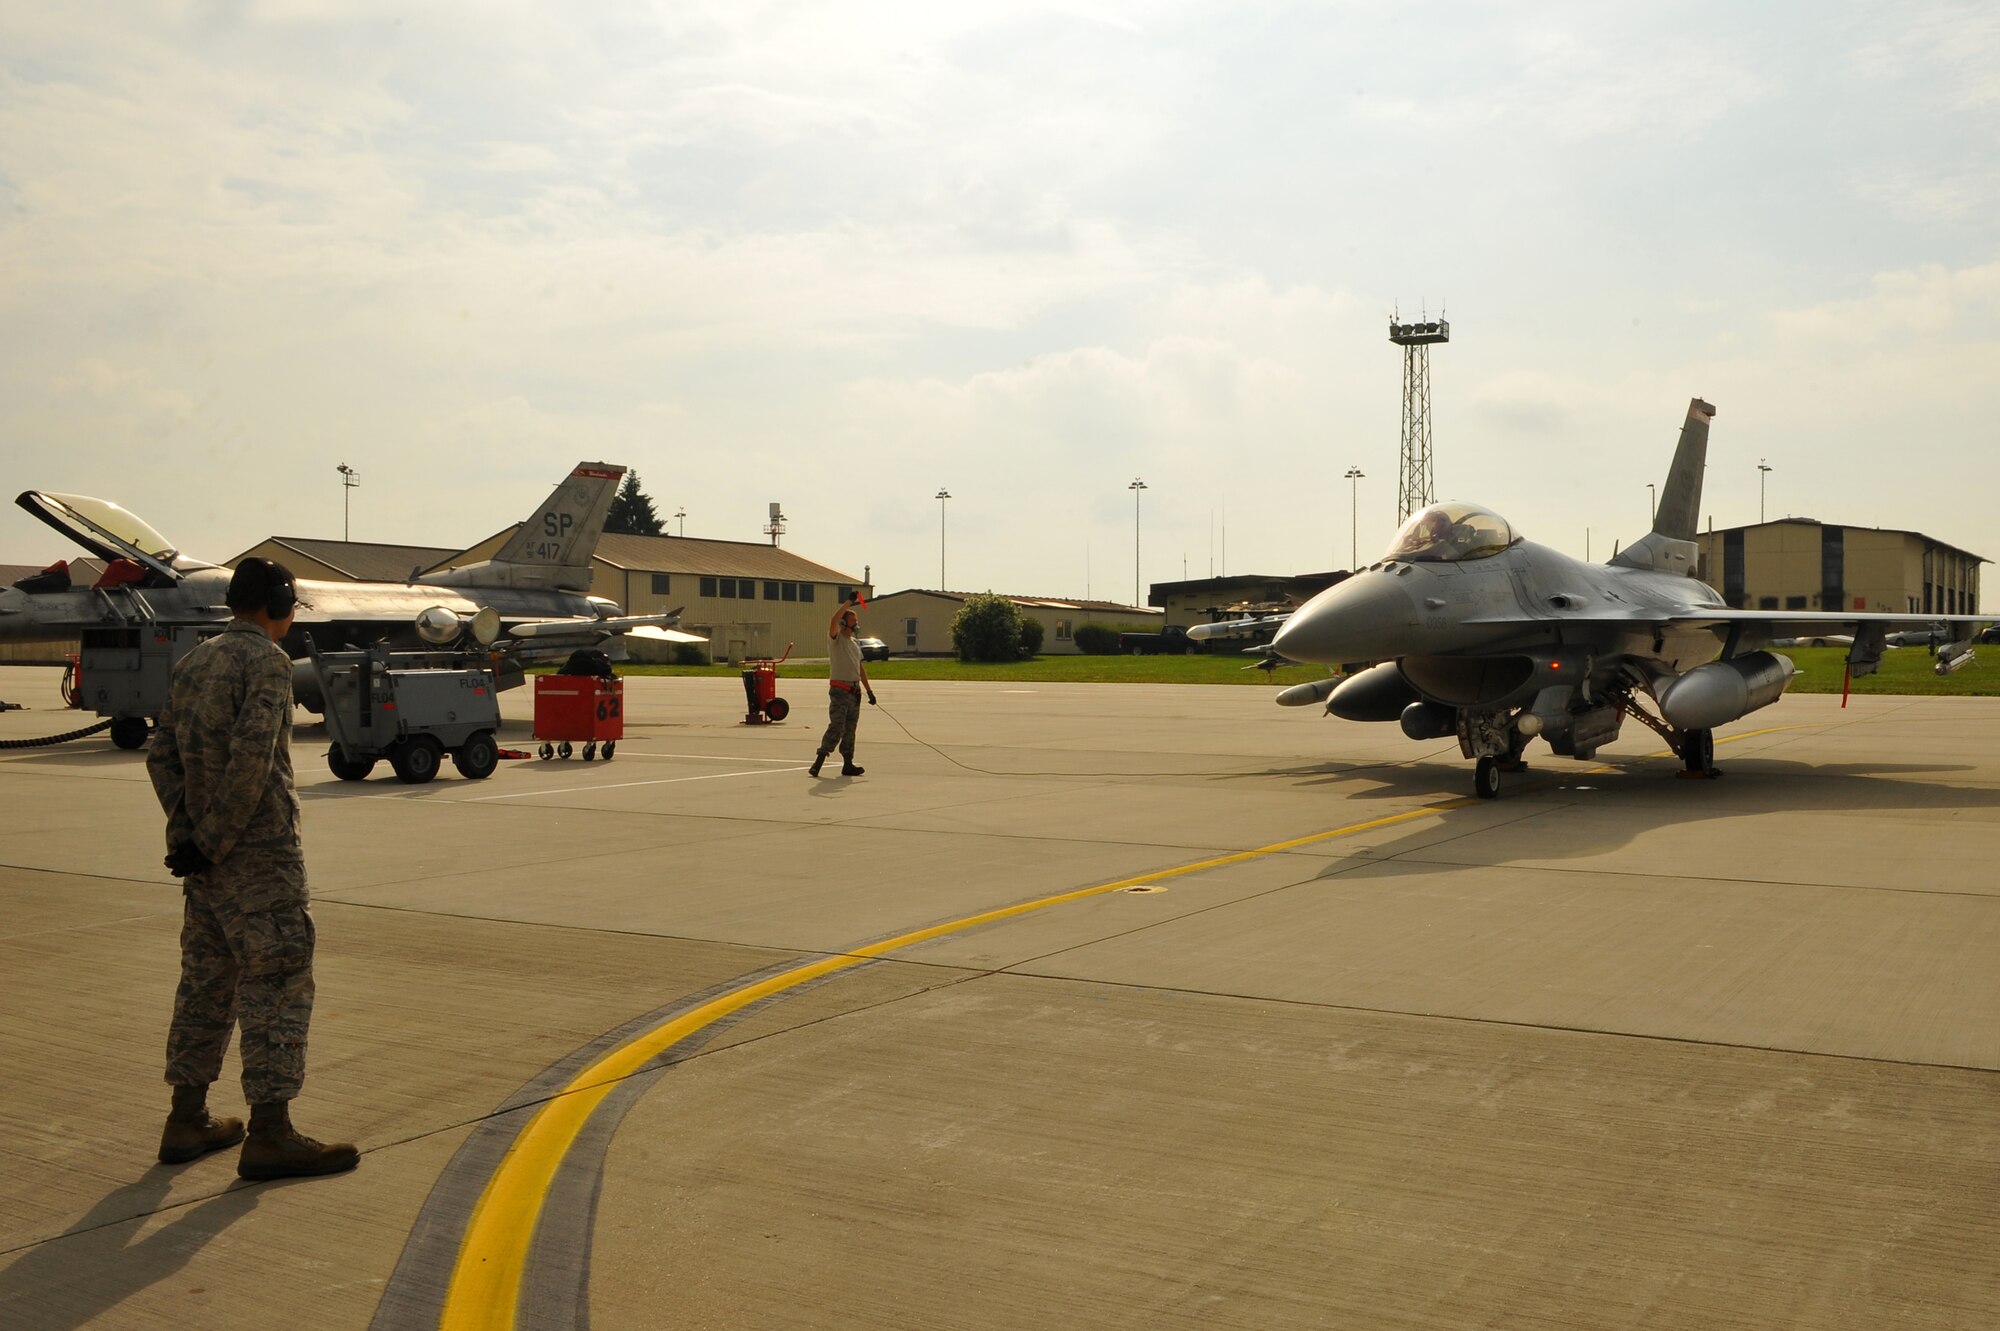 SPANGDAHLEM AIR BASE, Germany – Airman 1st Class William Seay, left, 480th Aircraft Maintenance Unit weapons load crew member, and Airman 1st Class Joshua Berard, 480th AMU crew chief, complete a standard aircraft launch procedure for an F-16 Fighting Falcon on Ramp 4 here June 19. The 480th AMU plays a vital role in supporting the F-16’s combat training mission, which prepares them for regional defense and air superiority. (U.S. Air Force photo by Airman 1st Class Dillon/Released)